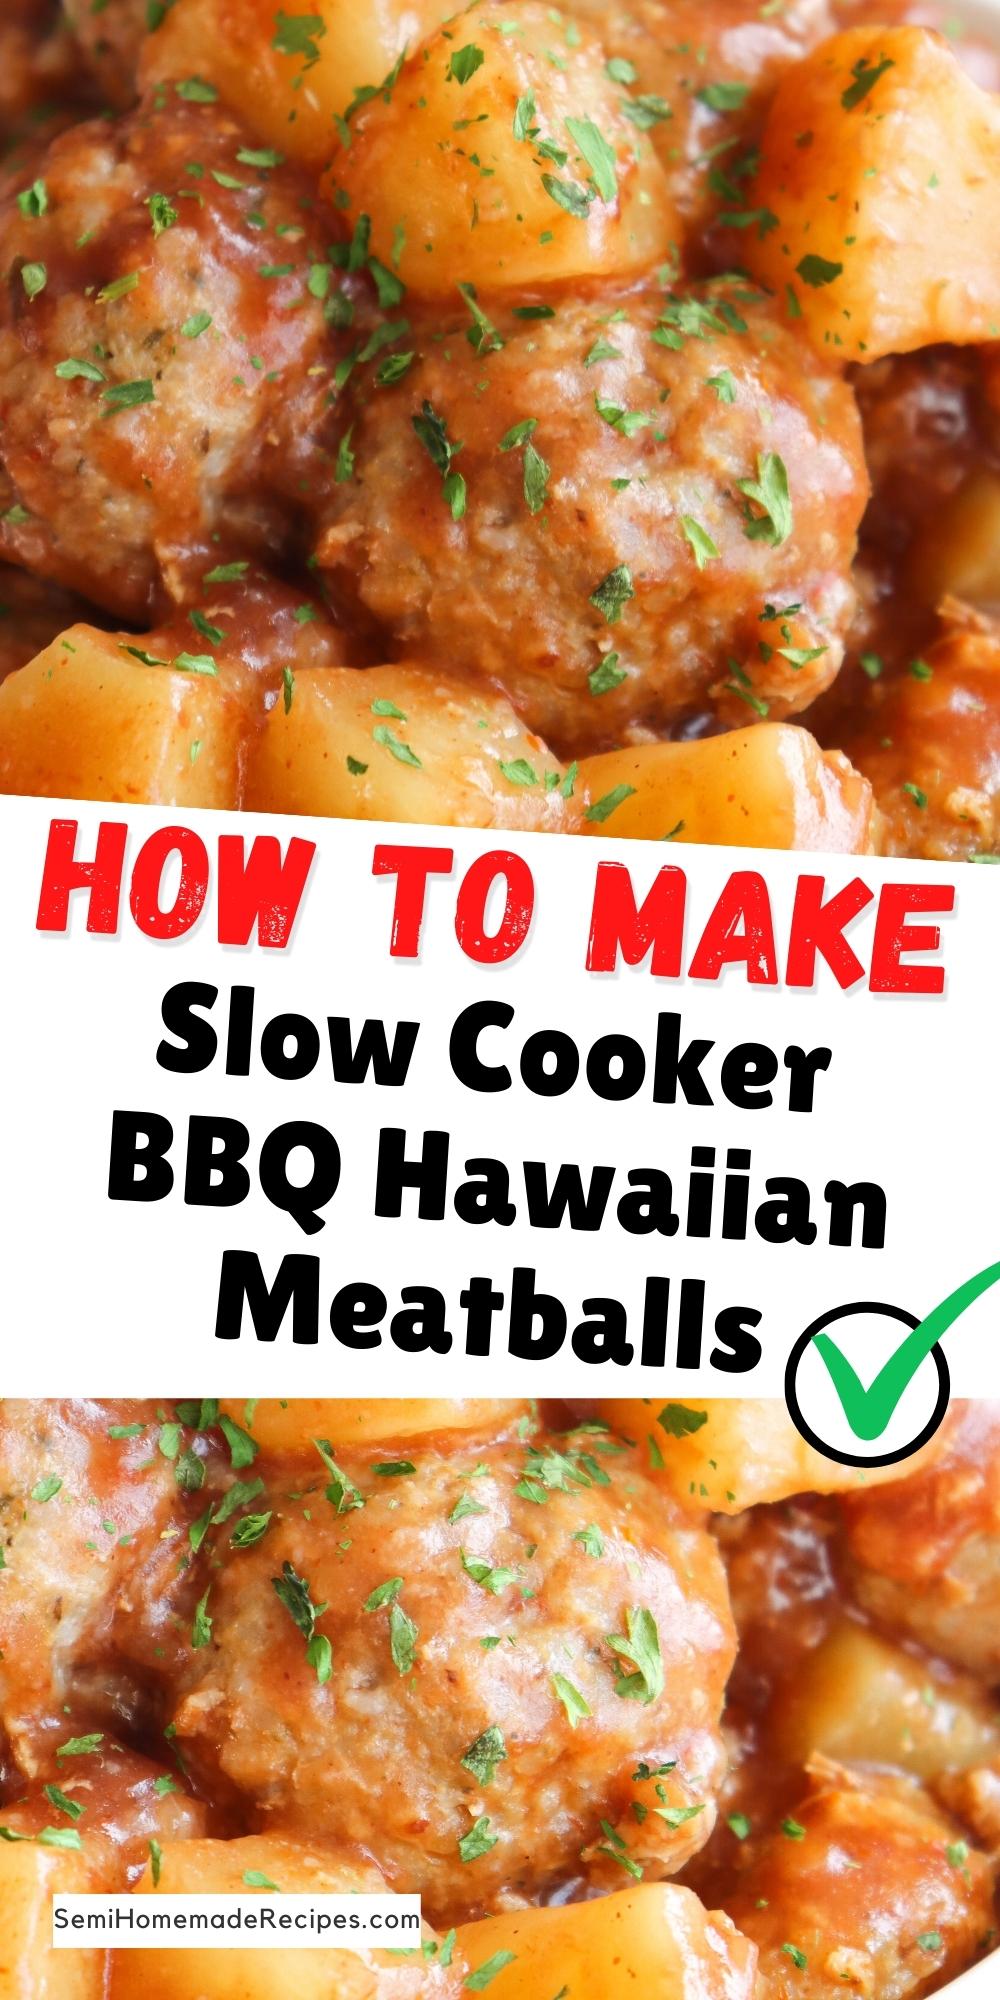 These Easy Slow Cooker BBQ Hawaiian Meatballs only take 3 ingredients and a little time in the slow cooker / crockpot! Perfect for dinner or as an party appetizer! 